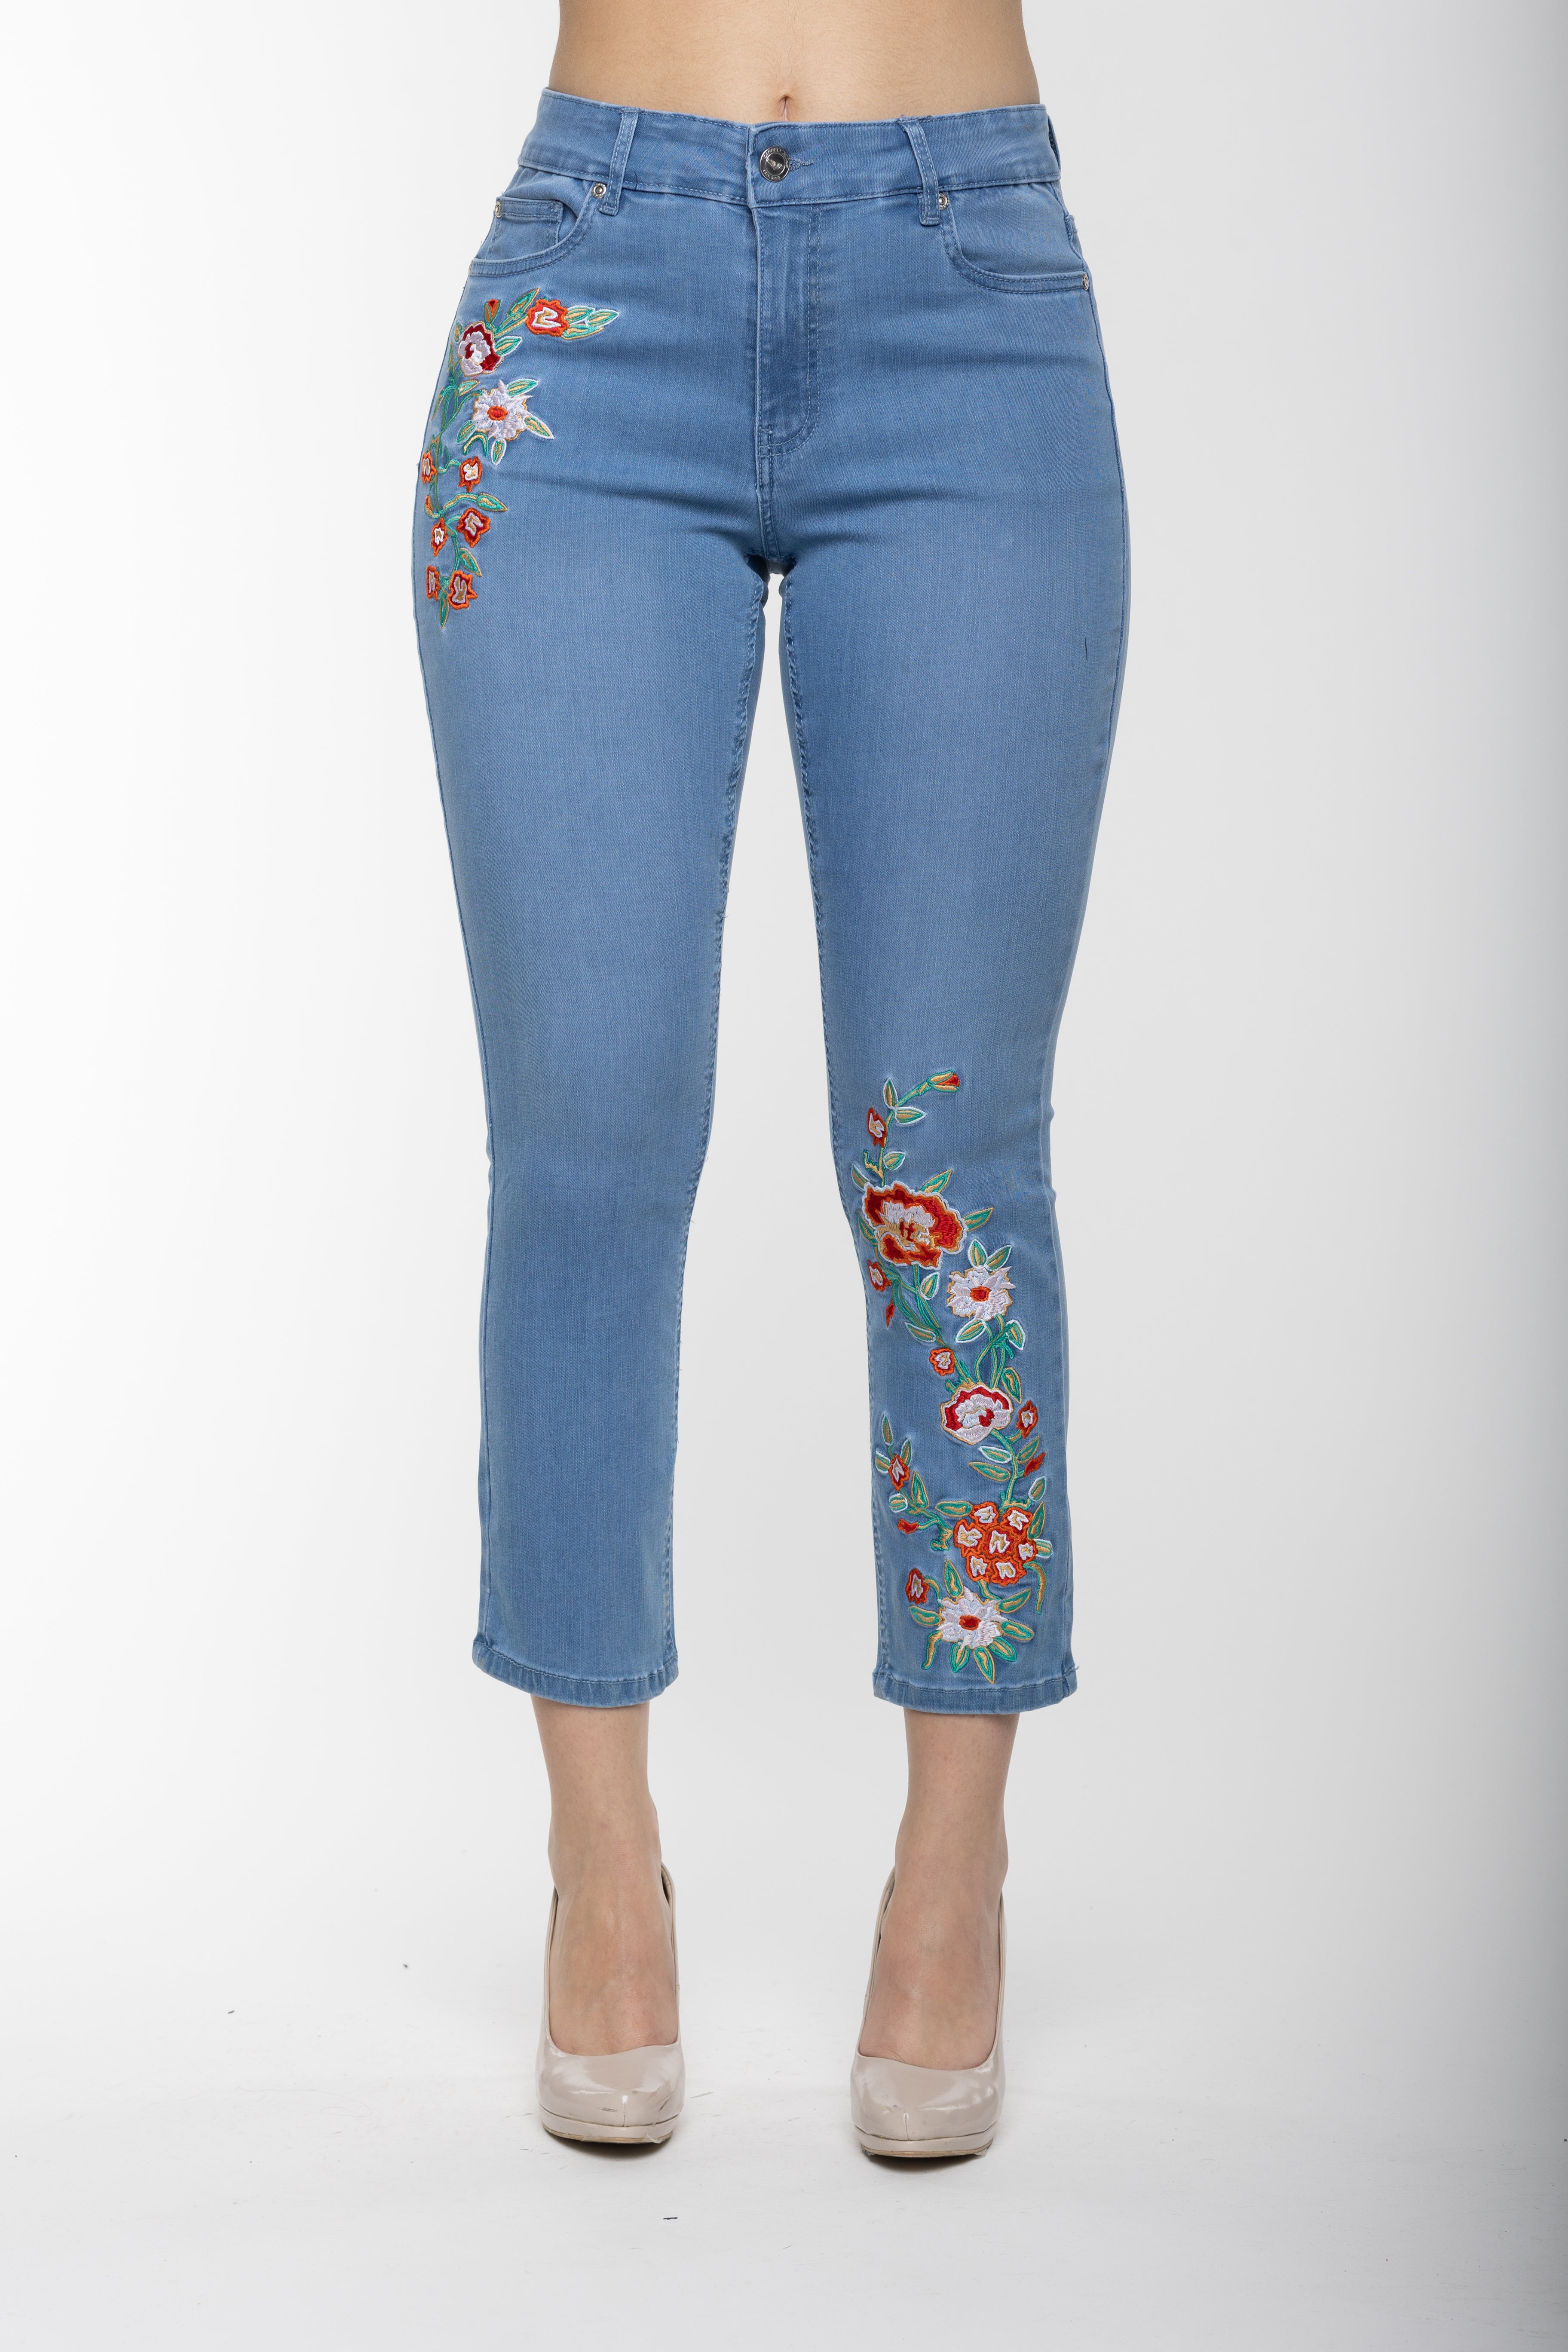 Carreli Jeans® | Angela Fit Ankle Length with Flower Embroideries in Bleach Wash